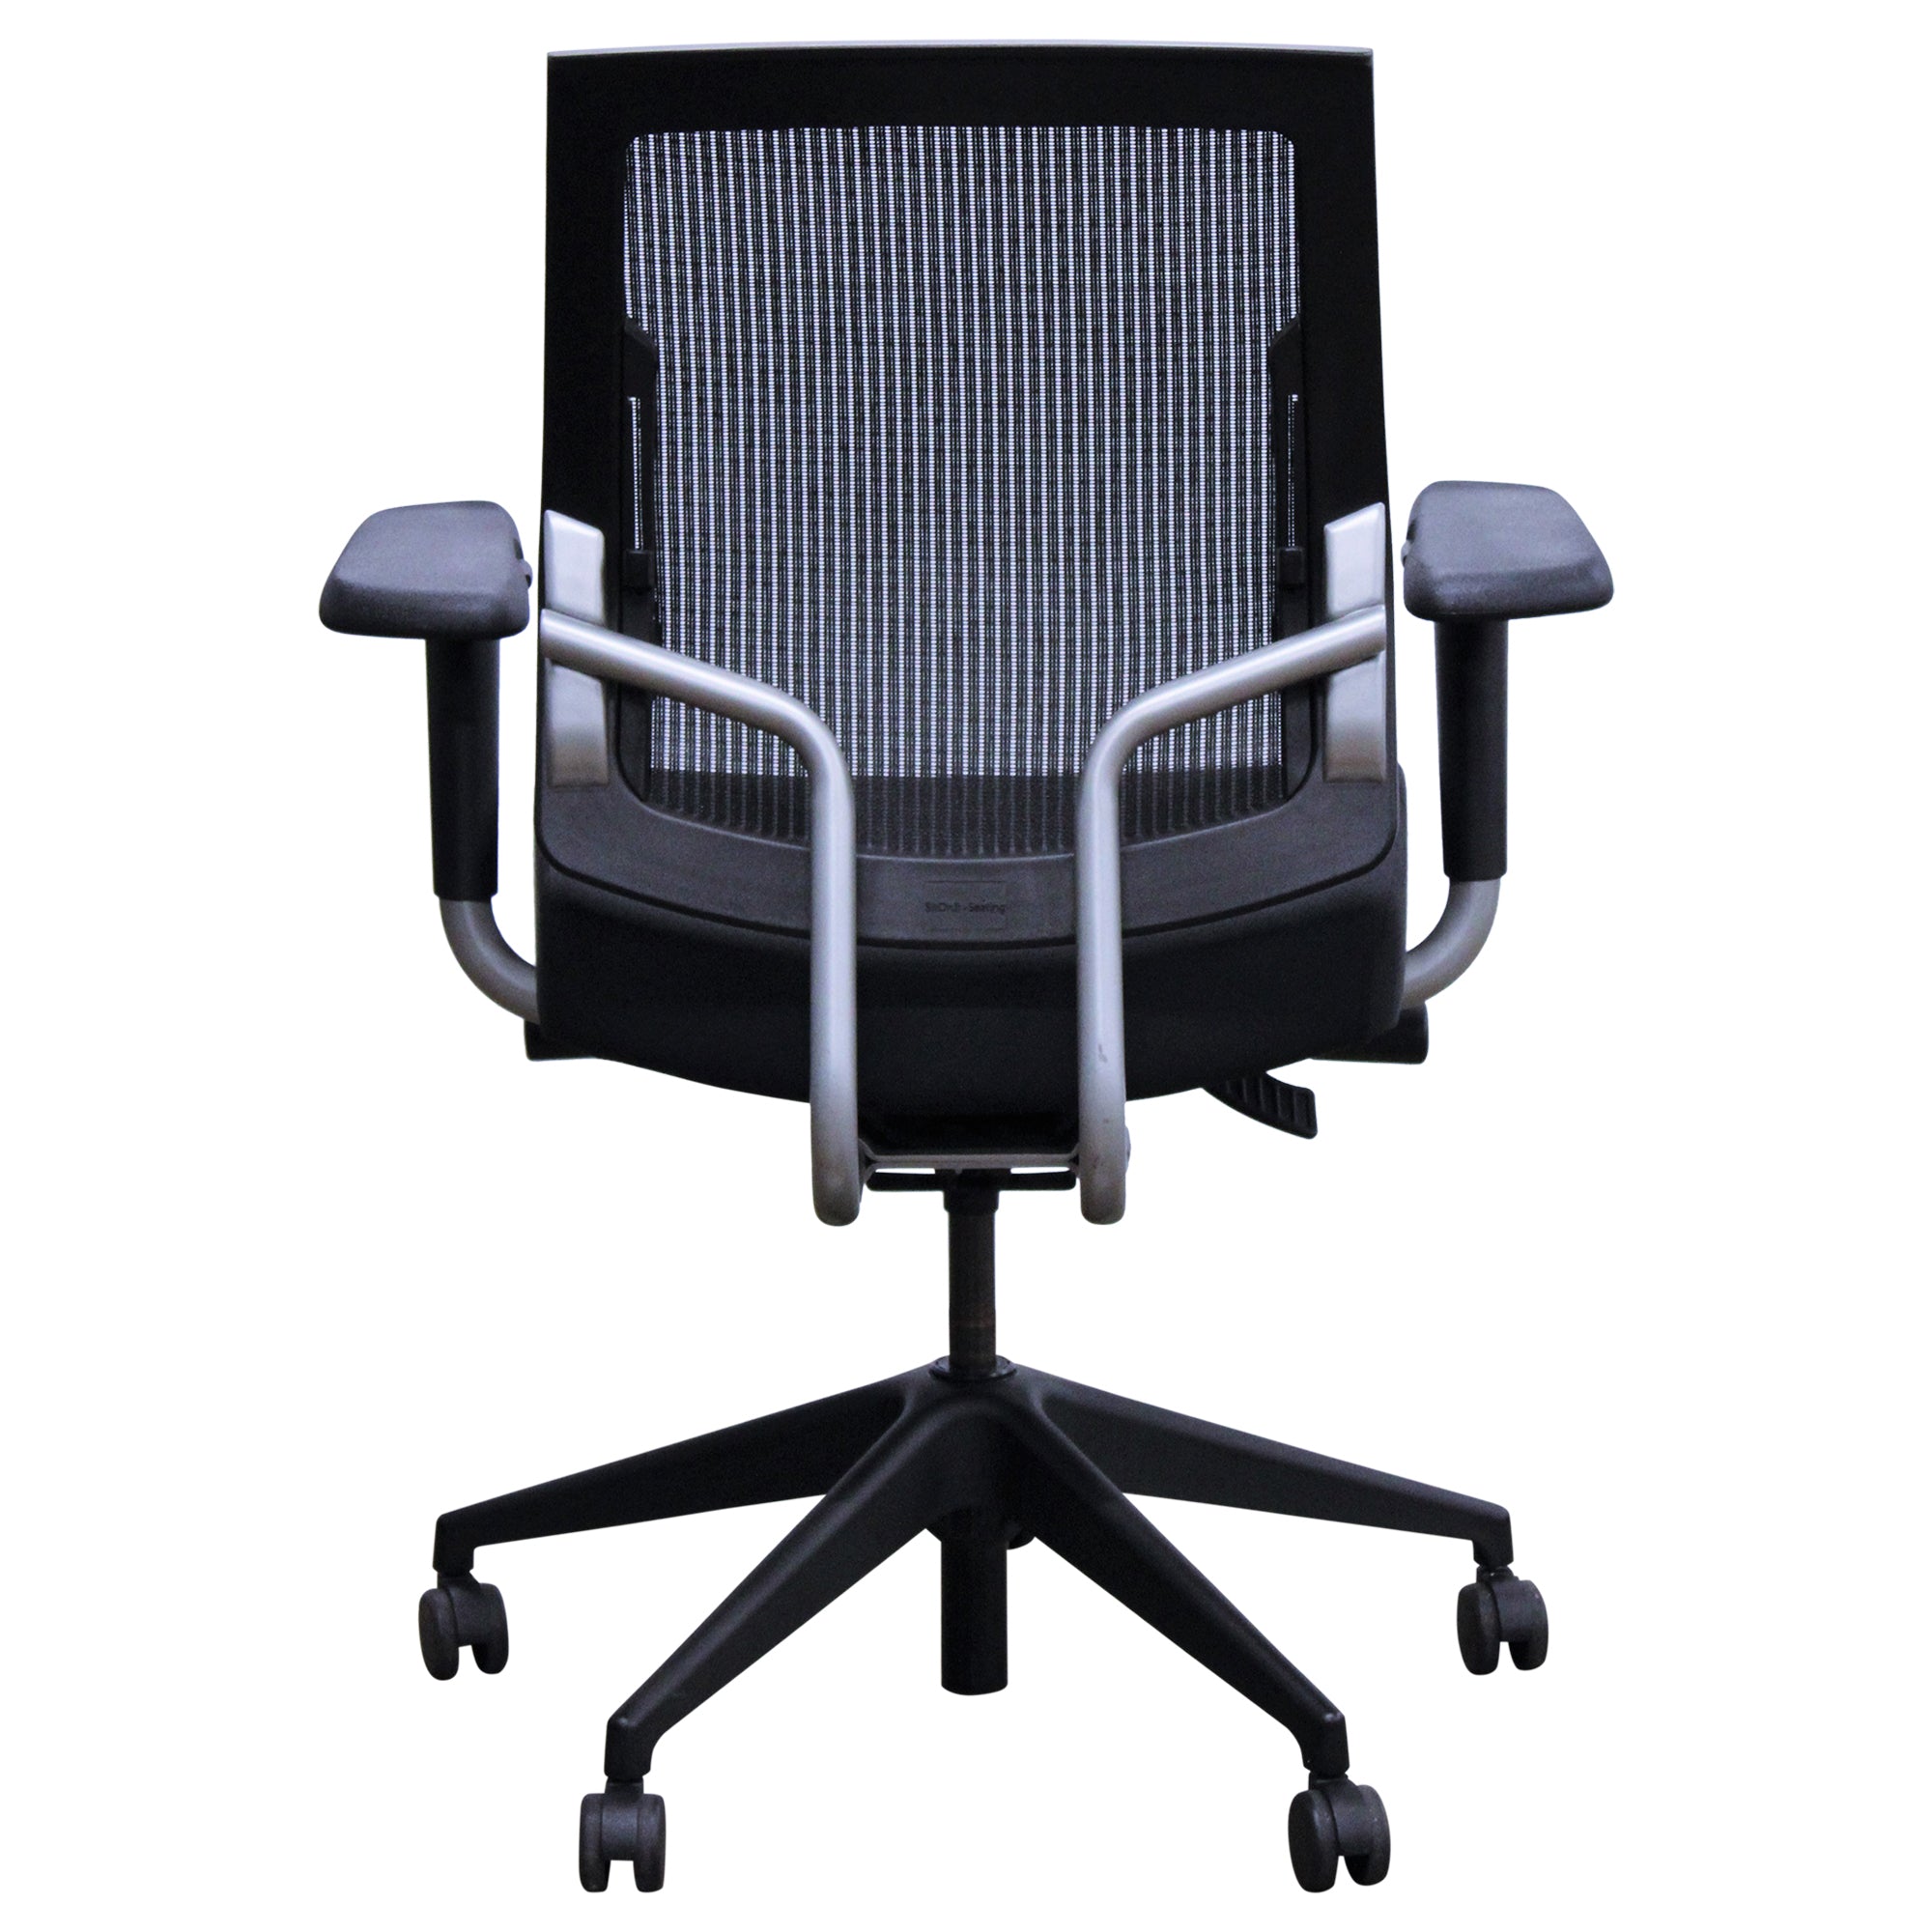 SitOnIt Seating Focus Task Chair, Black - Preowned